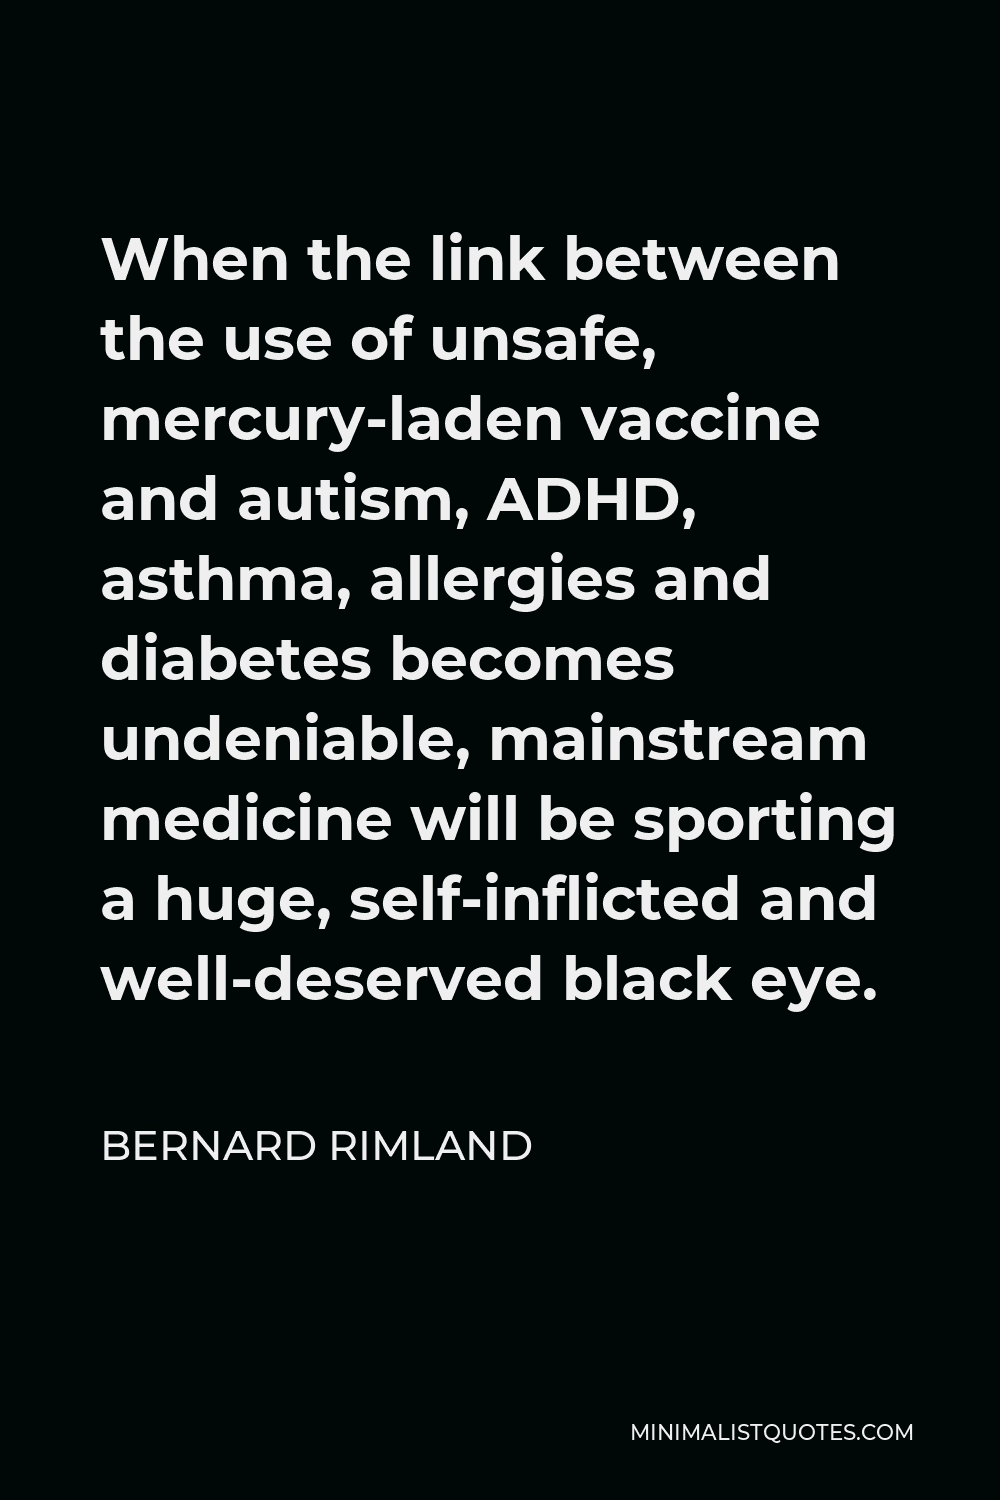 Bernard Rimland Quote - When the link between the use of unsafe, mercury-laden vaccine and autism, ADHD, asthma, allergies and diabetes becomes undeniable, mainstream medicine will be sporting a huge, self-inflicted and well-deserved black eye.